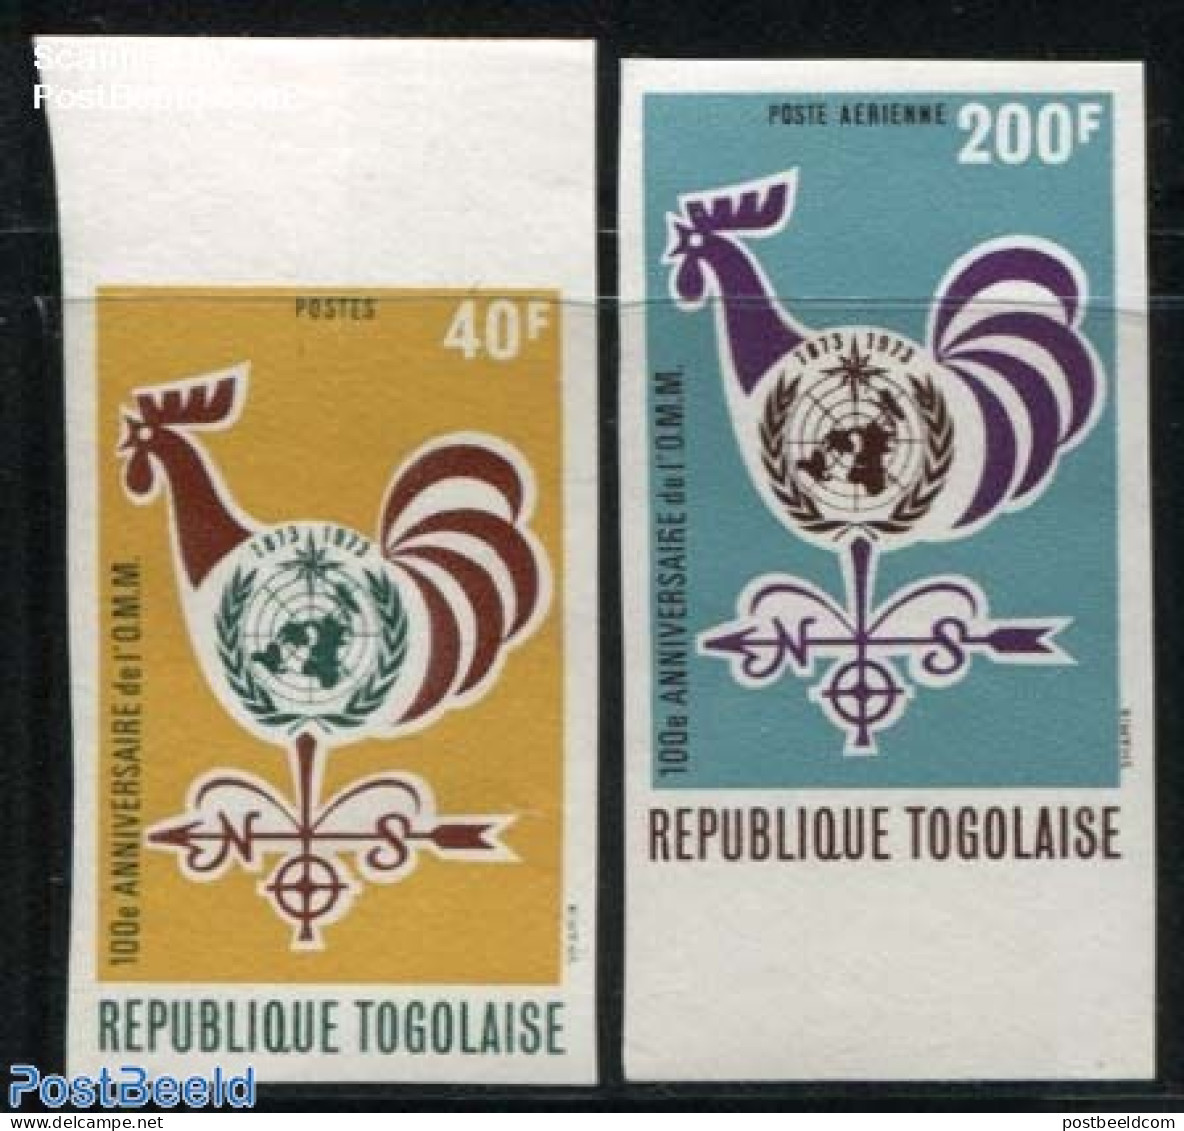 Togo 1973 IMO-WMO 2v, Imperforated, Mint NH, Nature - Science - Poultry - Meteorology - Klima & Meteorologie